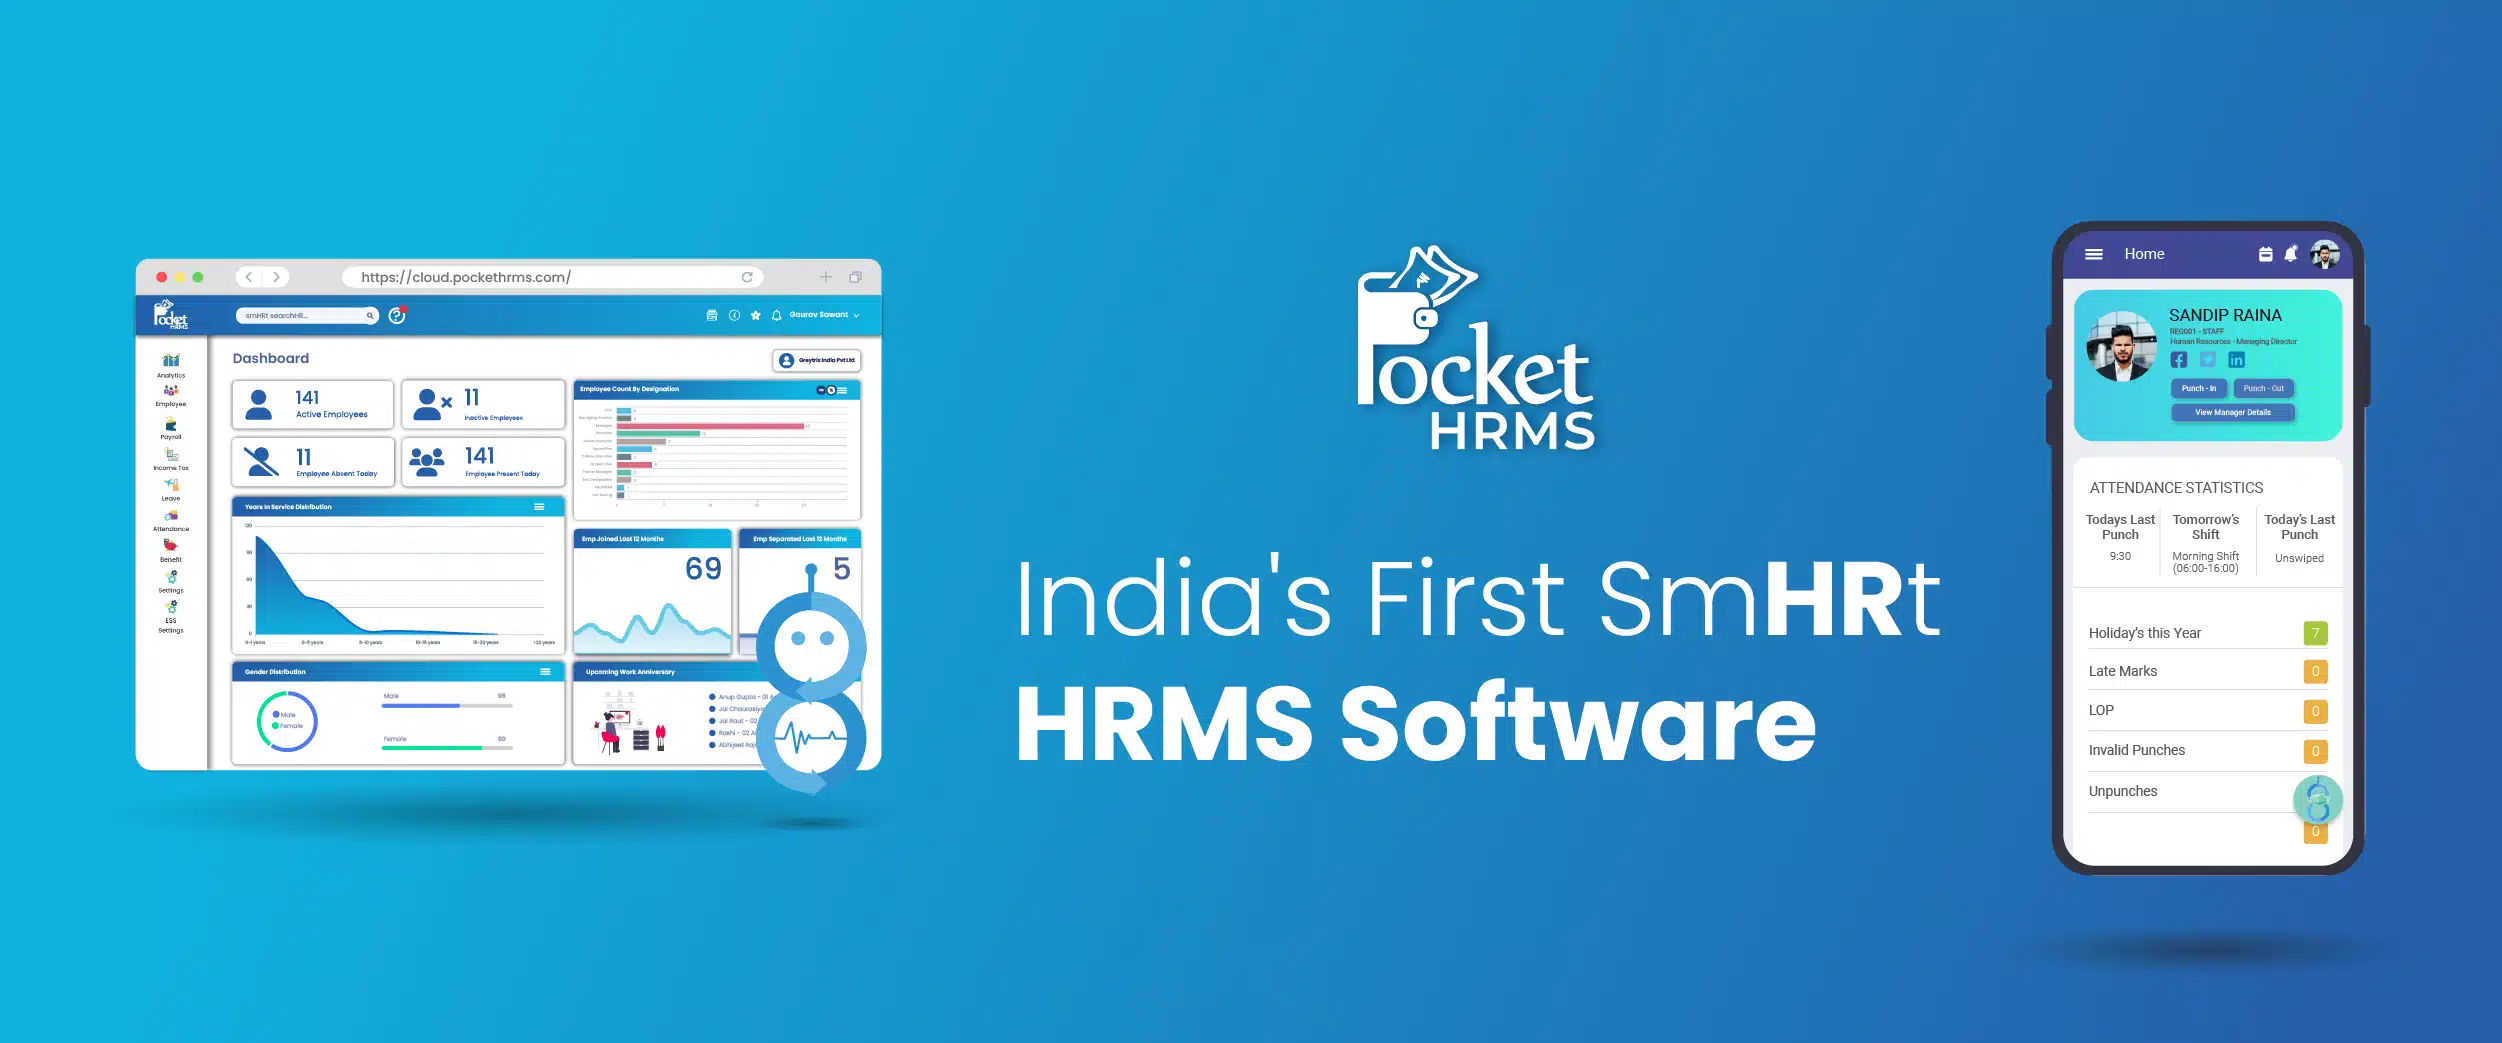 India's First Smart HRMS Software